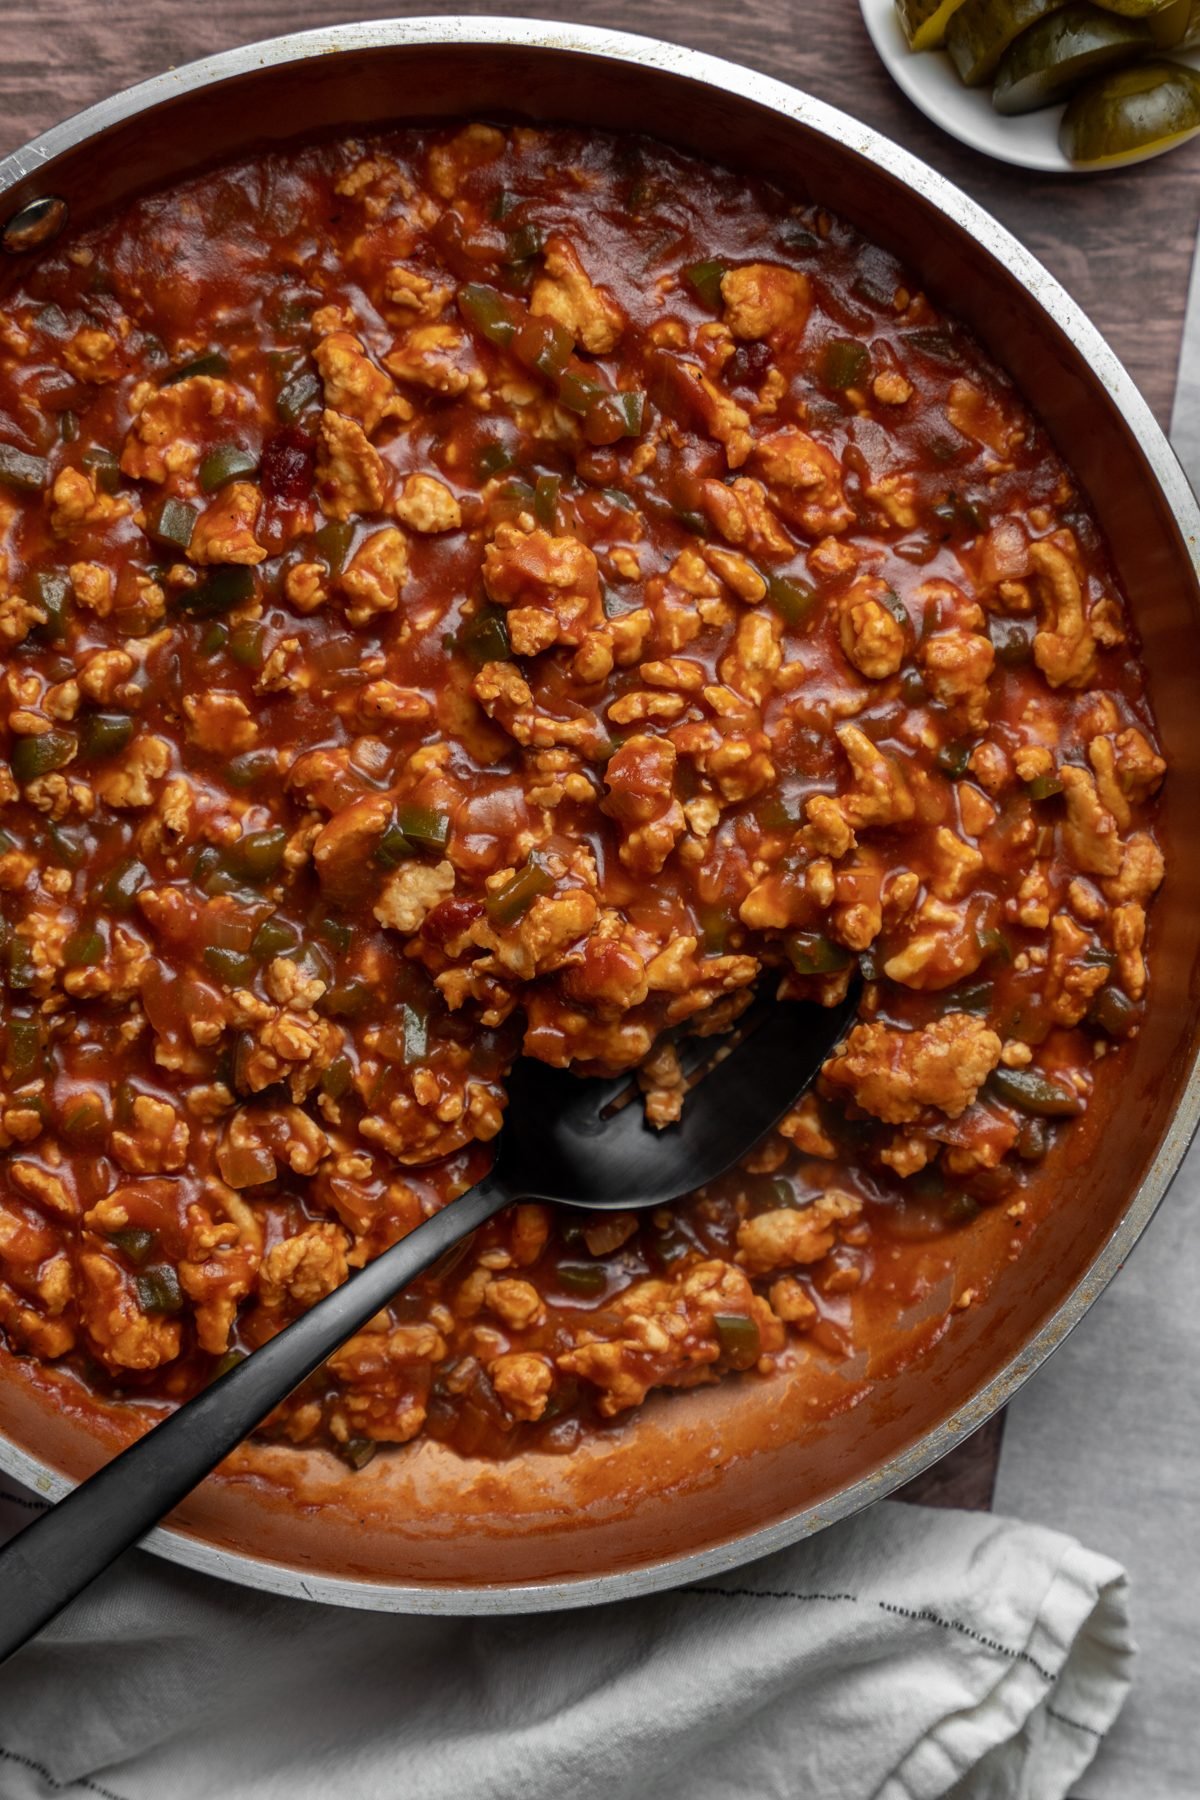 Spoon in a pan of ground chicken sloppy joe mix.